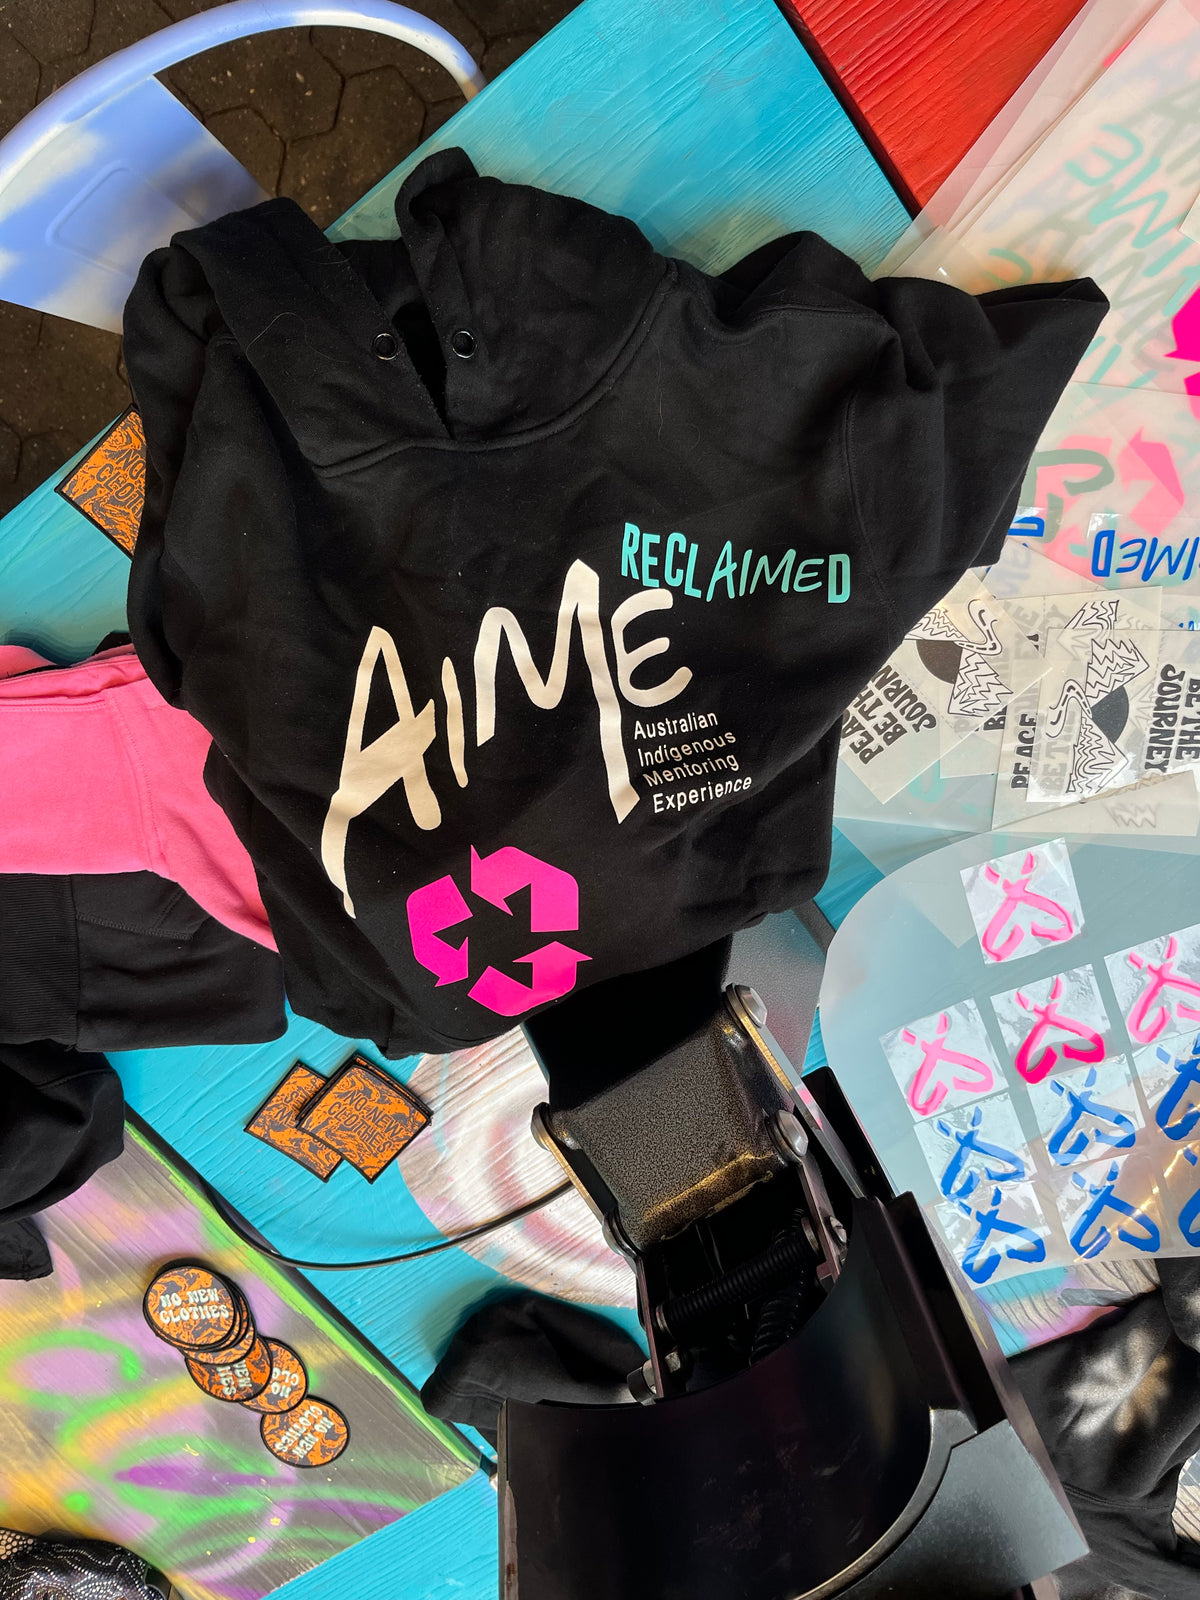 AIME’s ReclAIMEd program addresses the challenges of fashion waste and champions circularity with founding partners Thread Together and nANA jUDY.